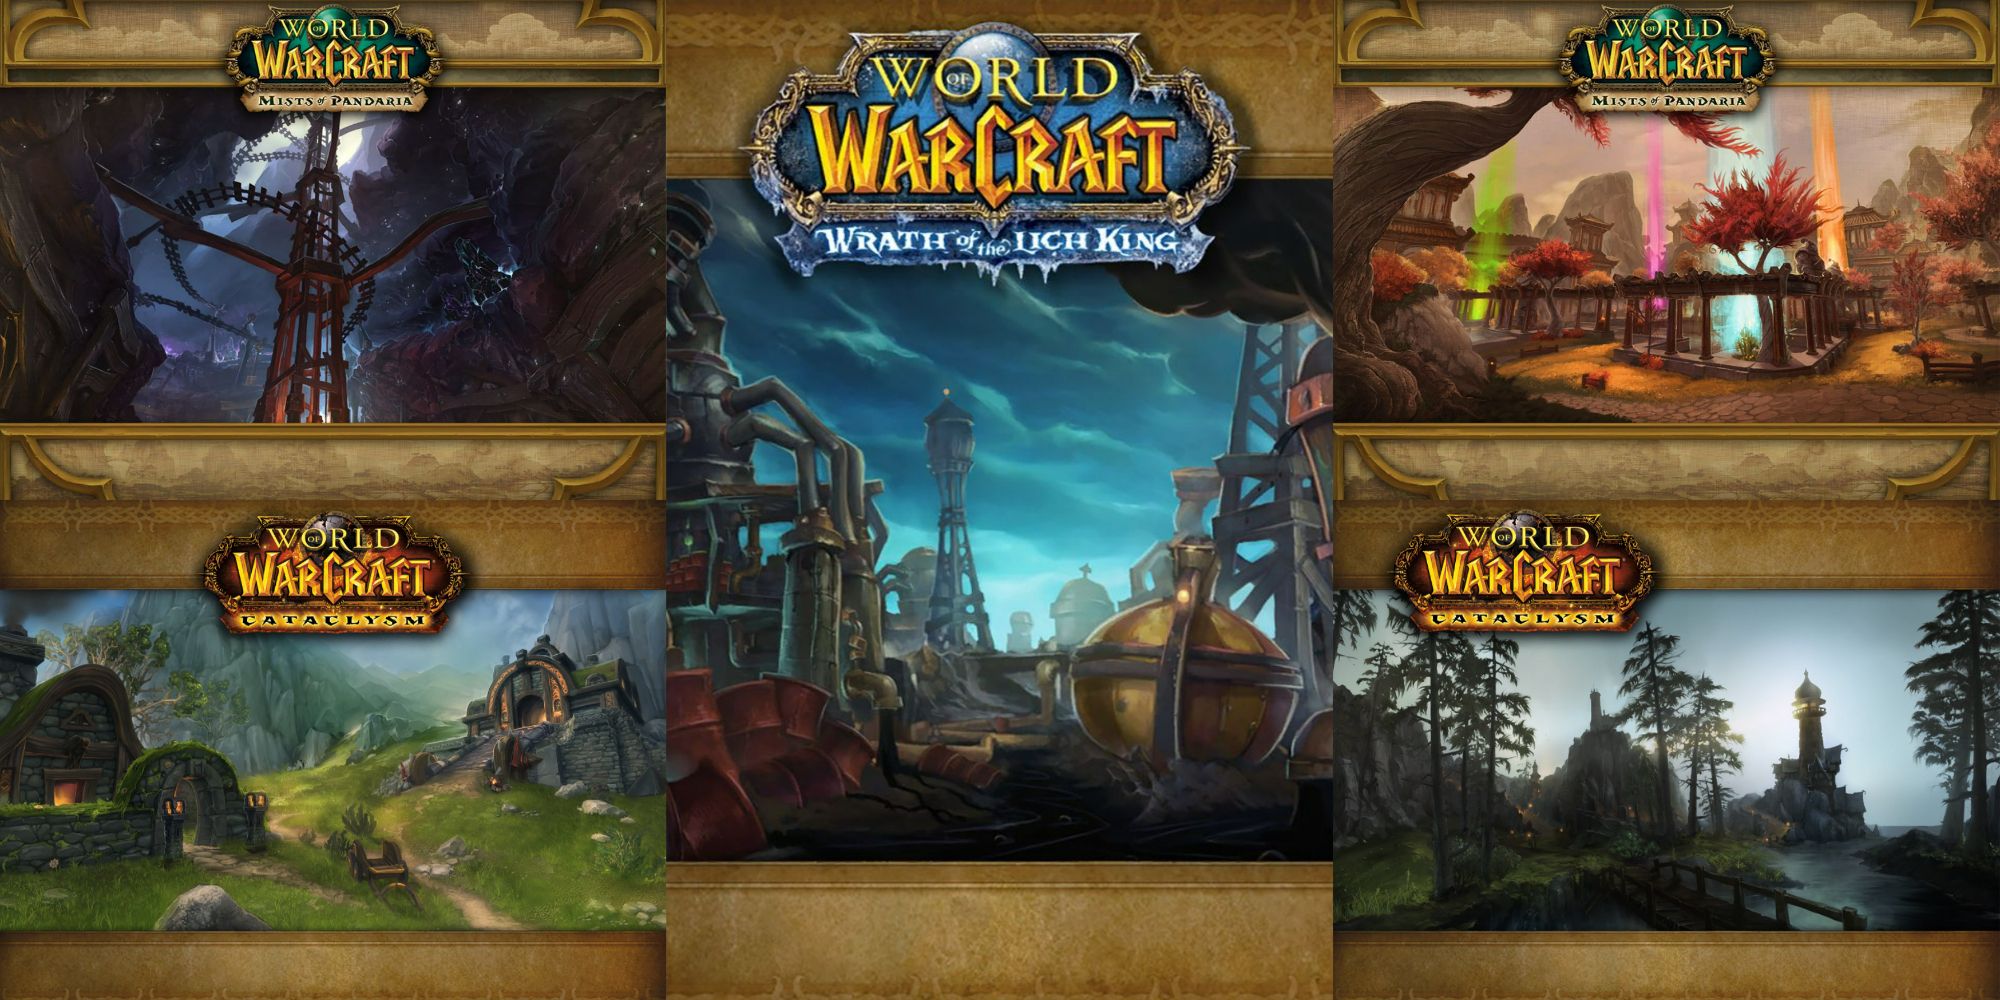 World of Warcraft split image of Silvershard Mines, Twin Peaks, Isle of Conquest, Temple of Kotmogu, and Battle for Gilneas loading screens